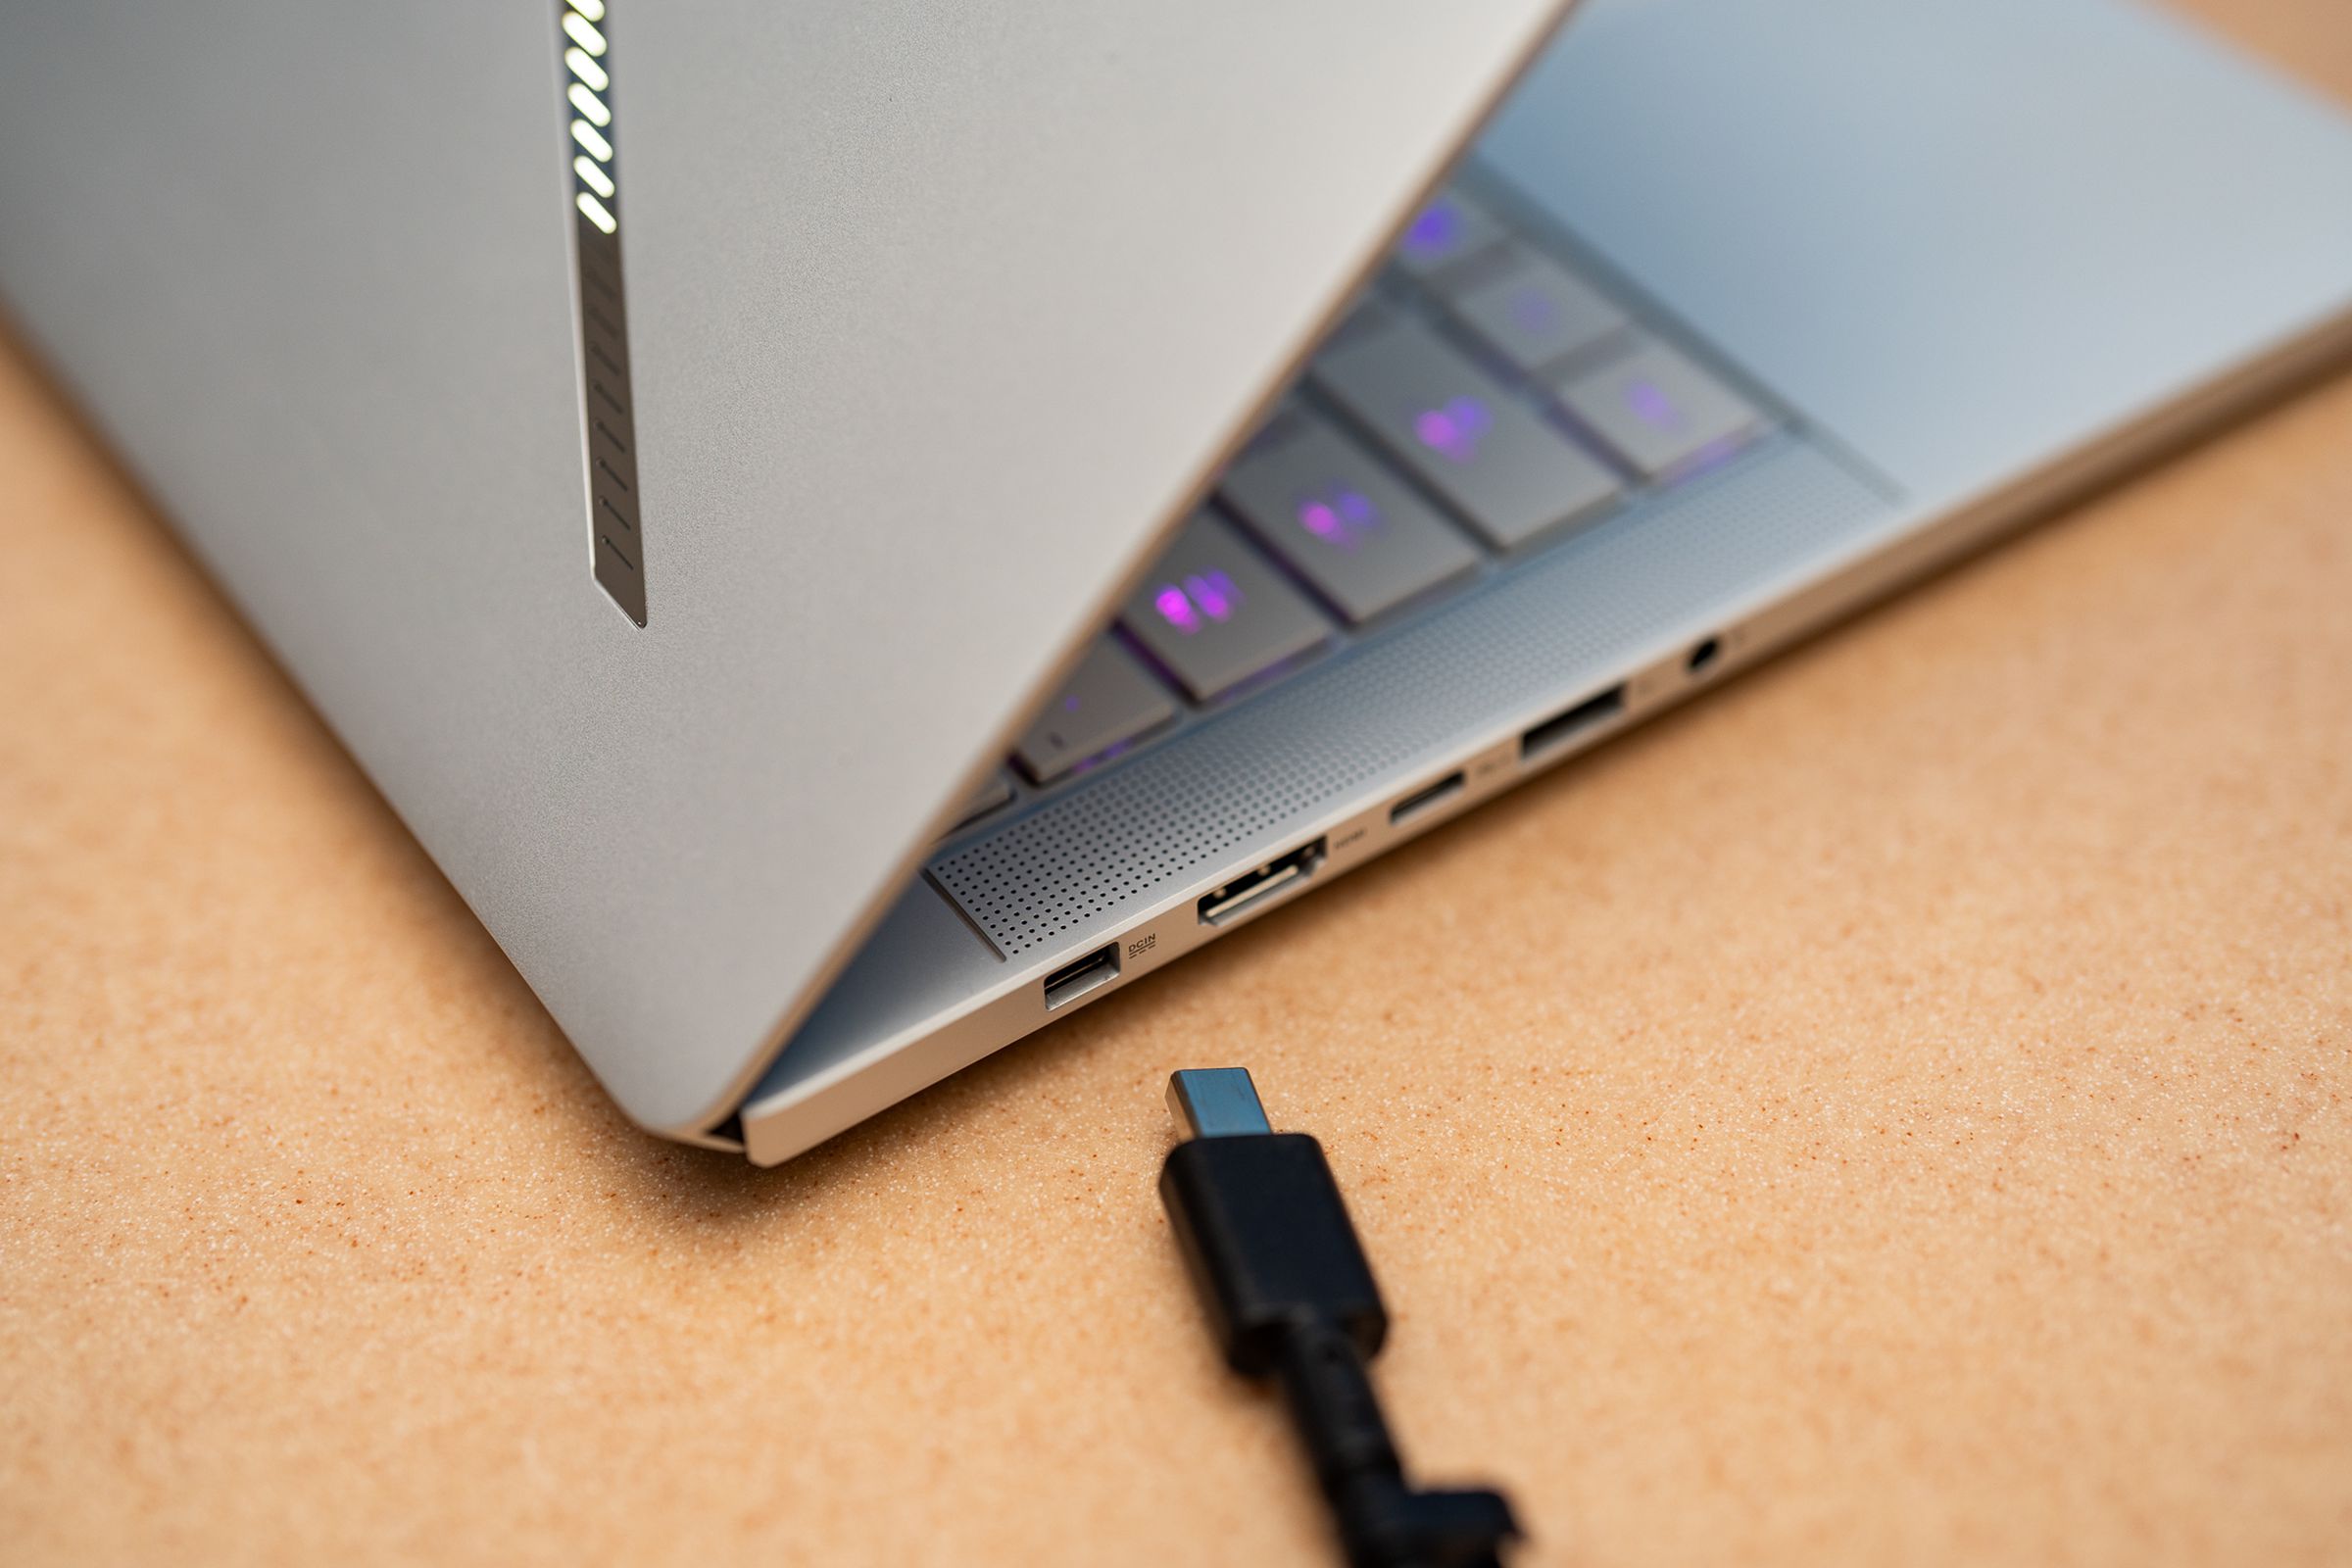 The new charging port almost looks like an oversized USB-C, but it’s Asus’ own proprietary (and also reversible) connector. USB-PD charging is available as well.